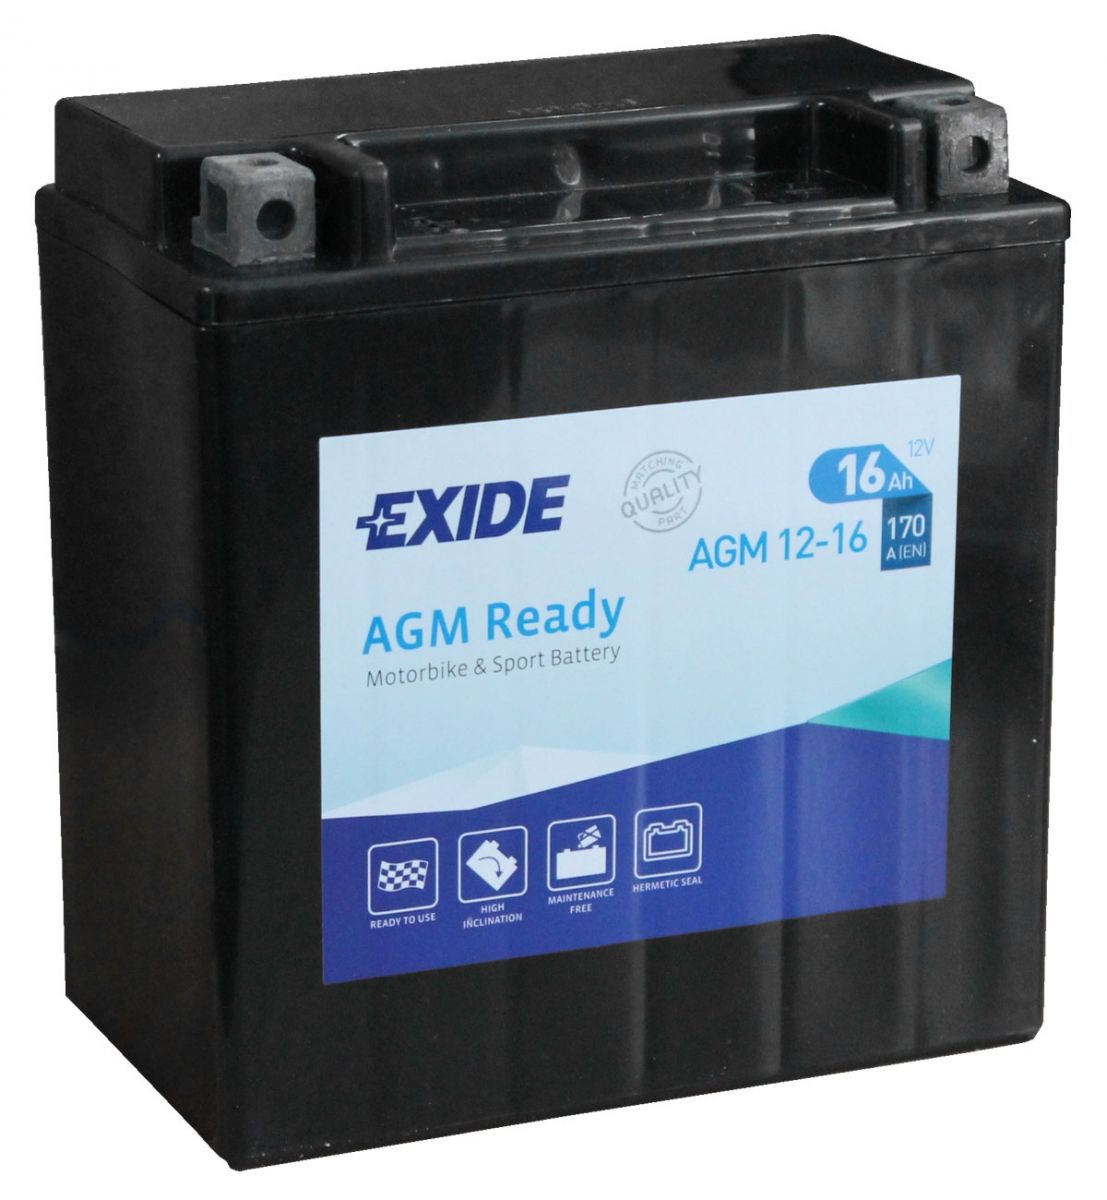 EXIDE AGM12-16 Maintenance free Motorcycle Battery Size